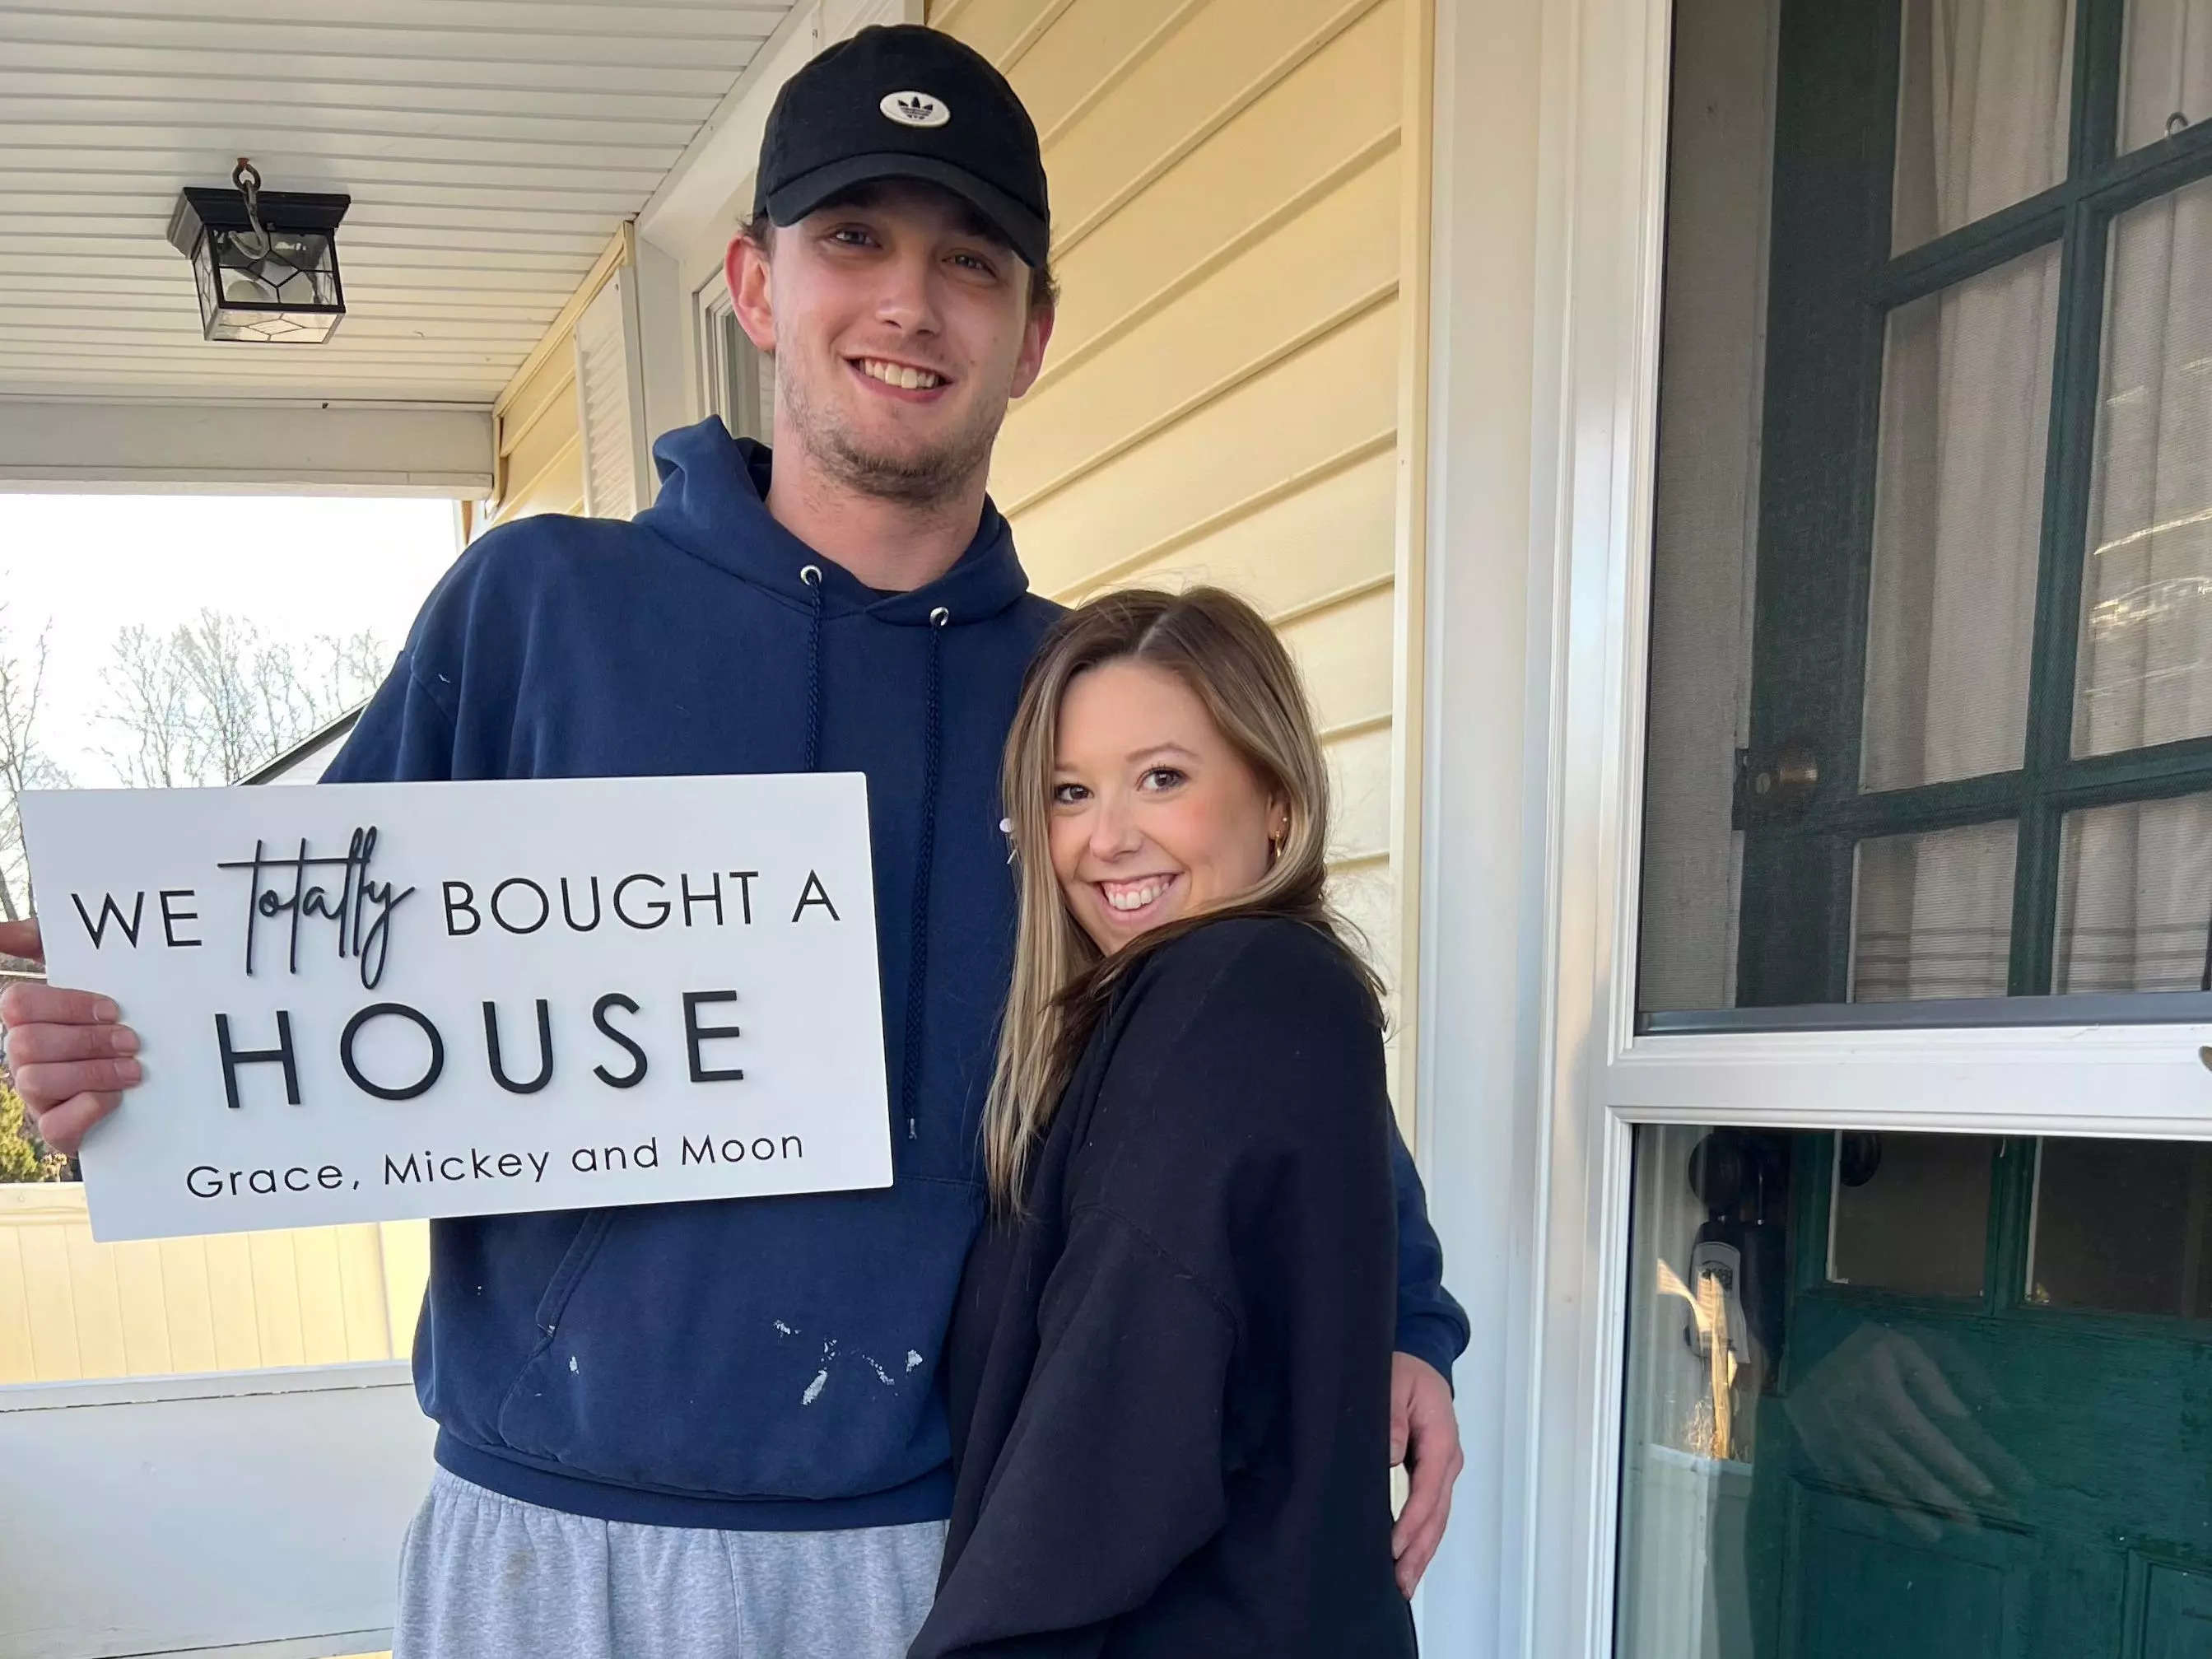 Grace Lucchese and Mickey Ricard holding a sign that says, "We totally bought a house."